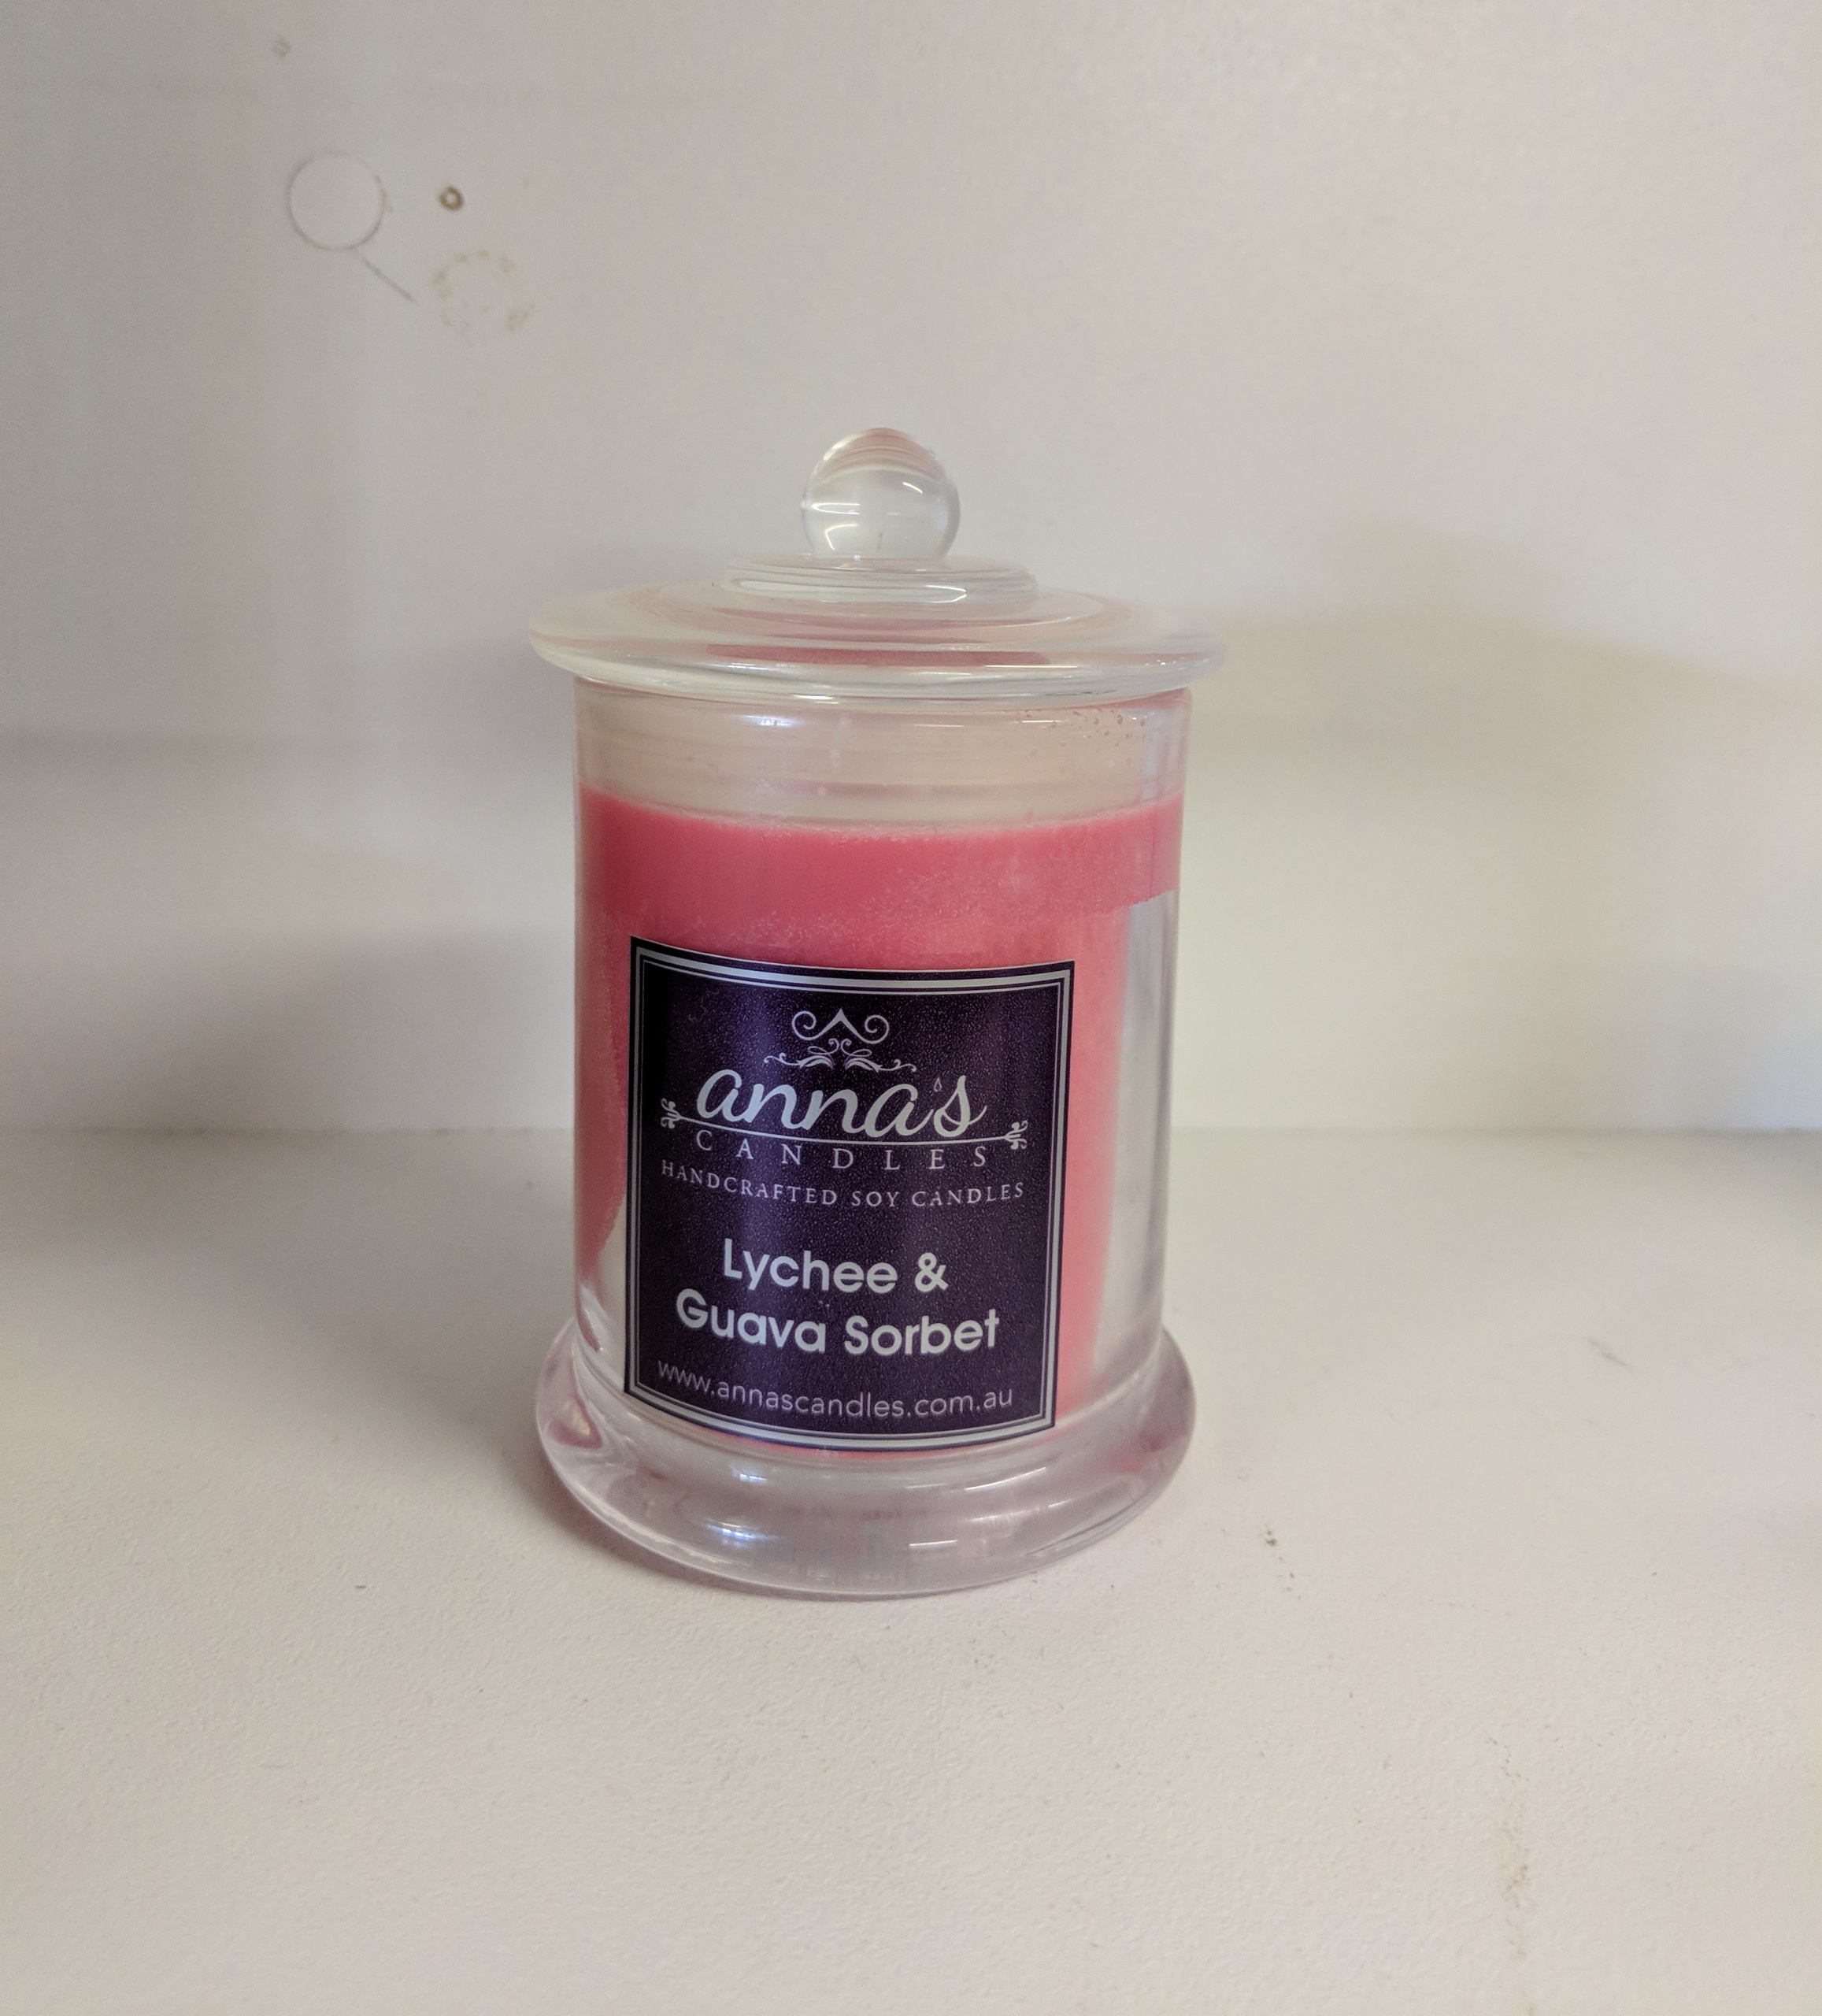 Lychee & Guava Sorbet Scented Candle Jar